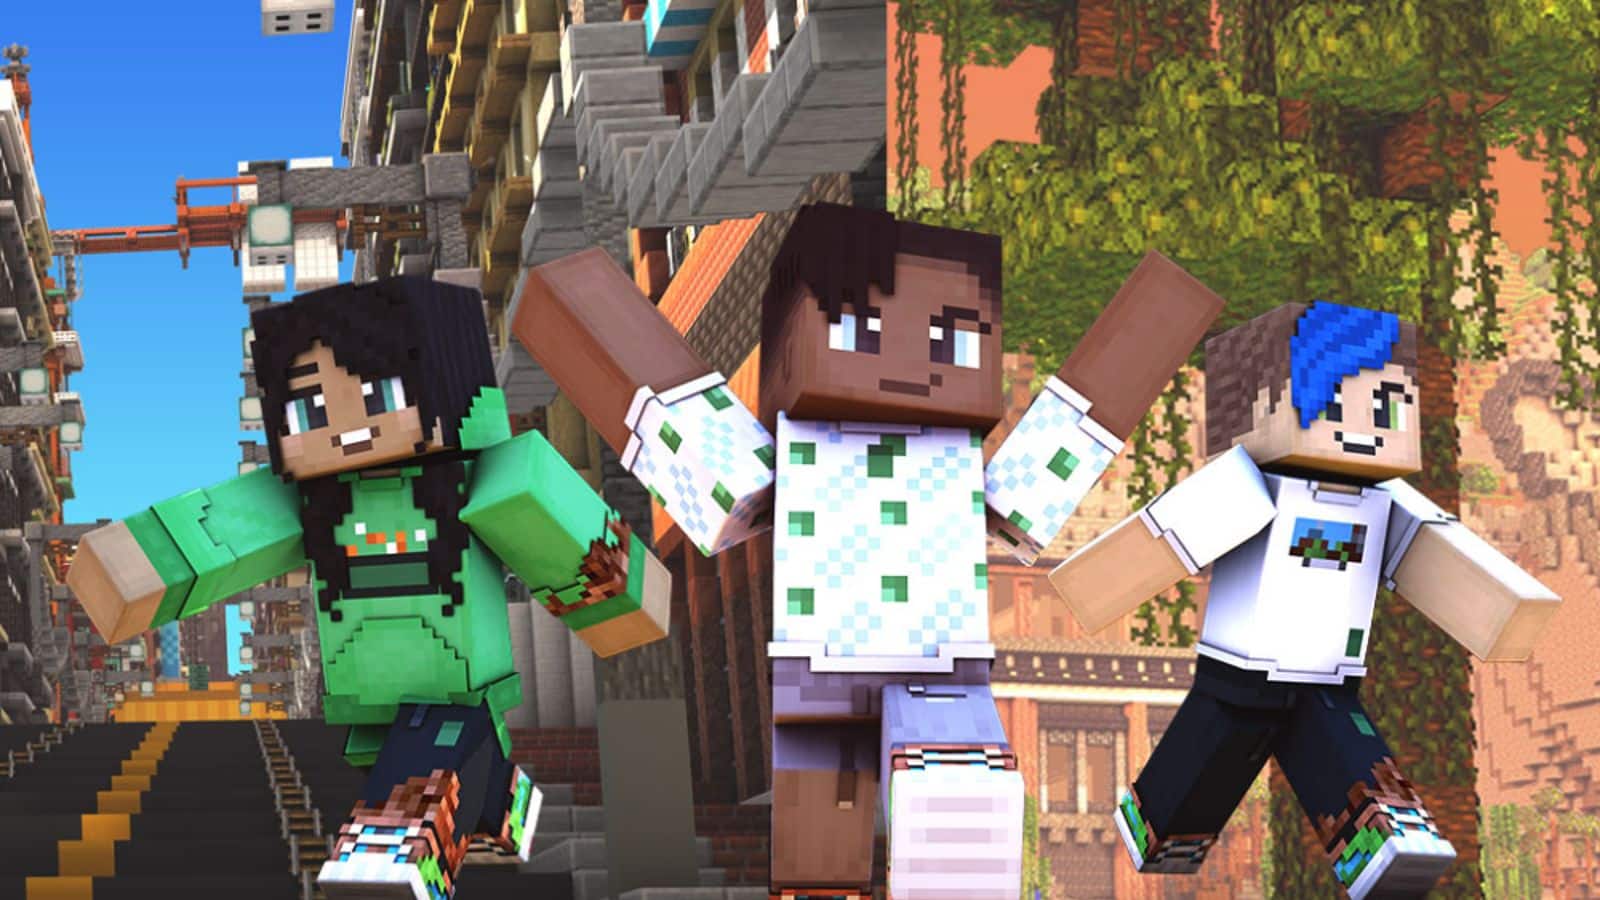 Netflix teams up with Mojang Studios for 'Minecraft' animated series